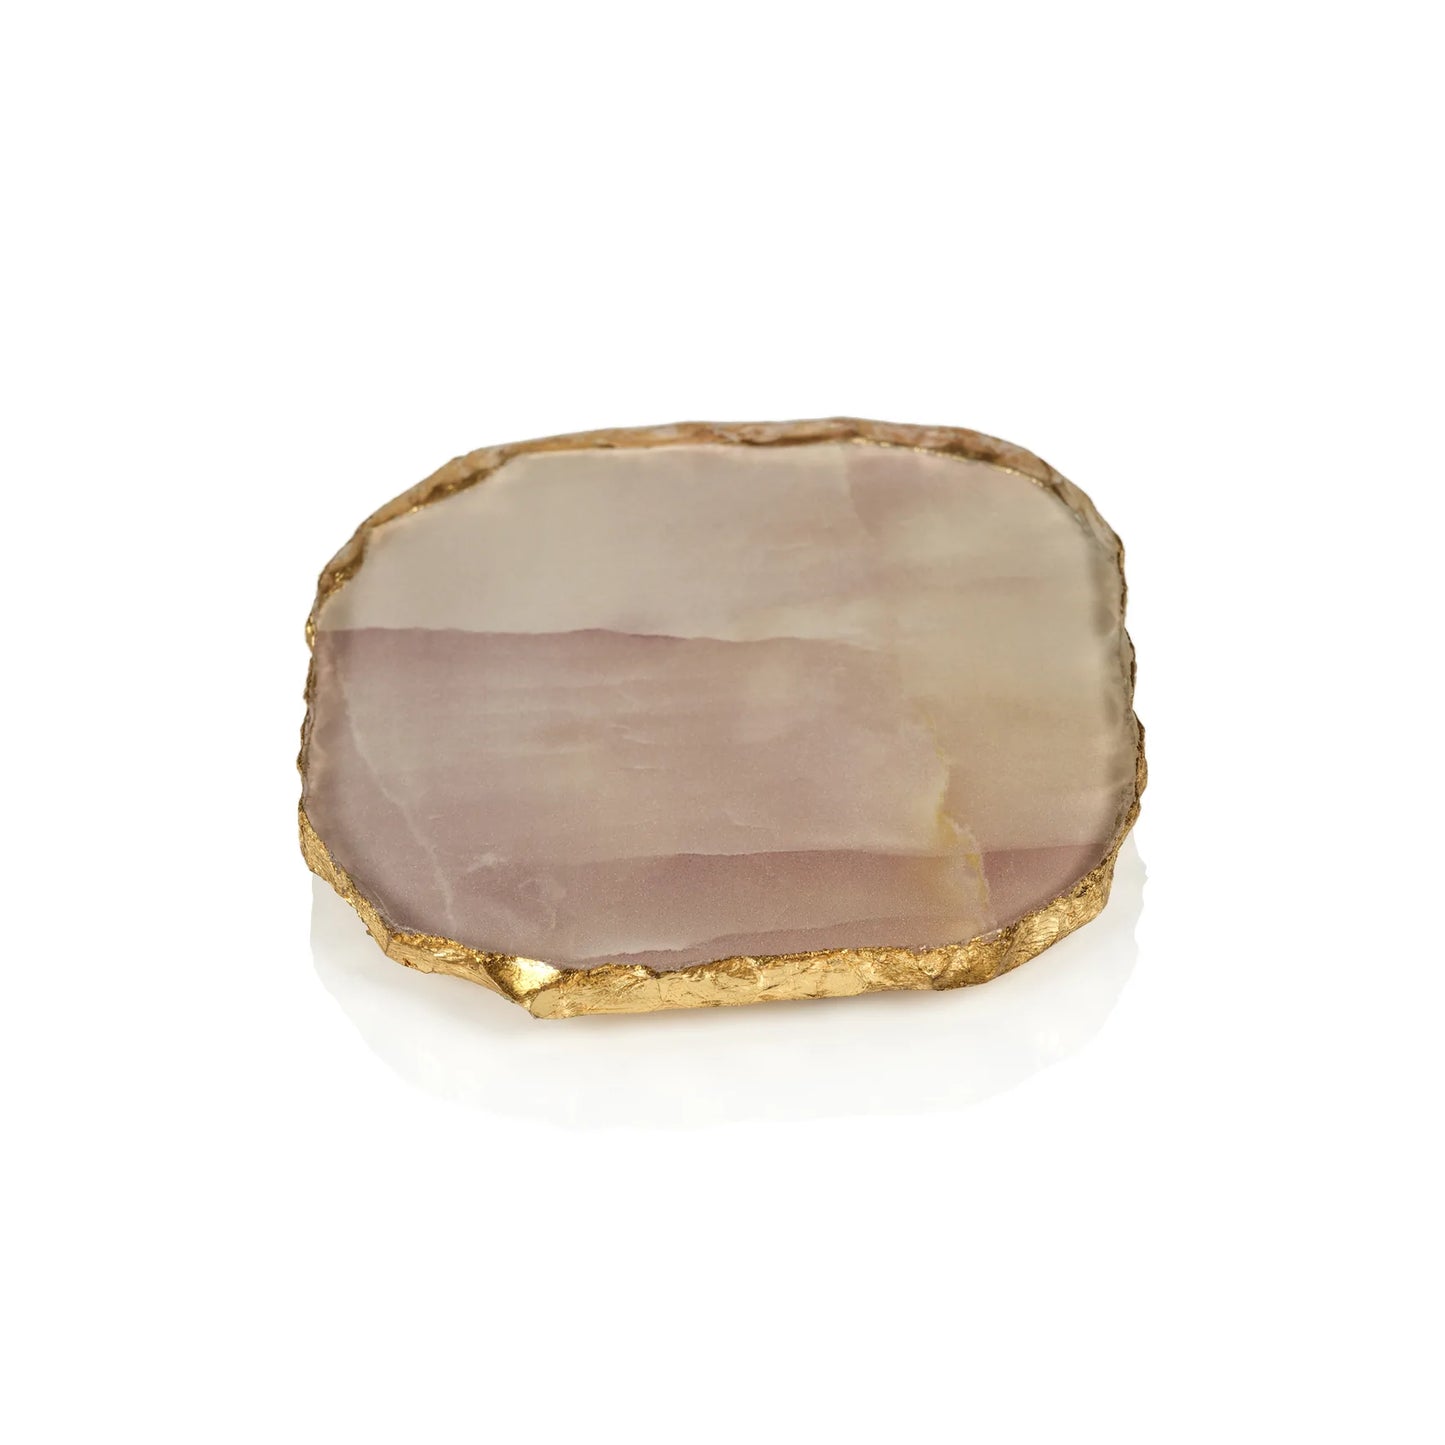 Agate Marble Glass Coaster with Gold Rim - Pink Tone